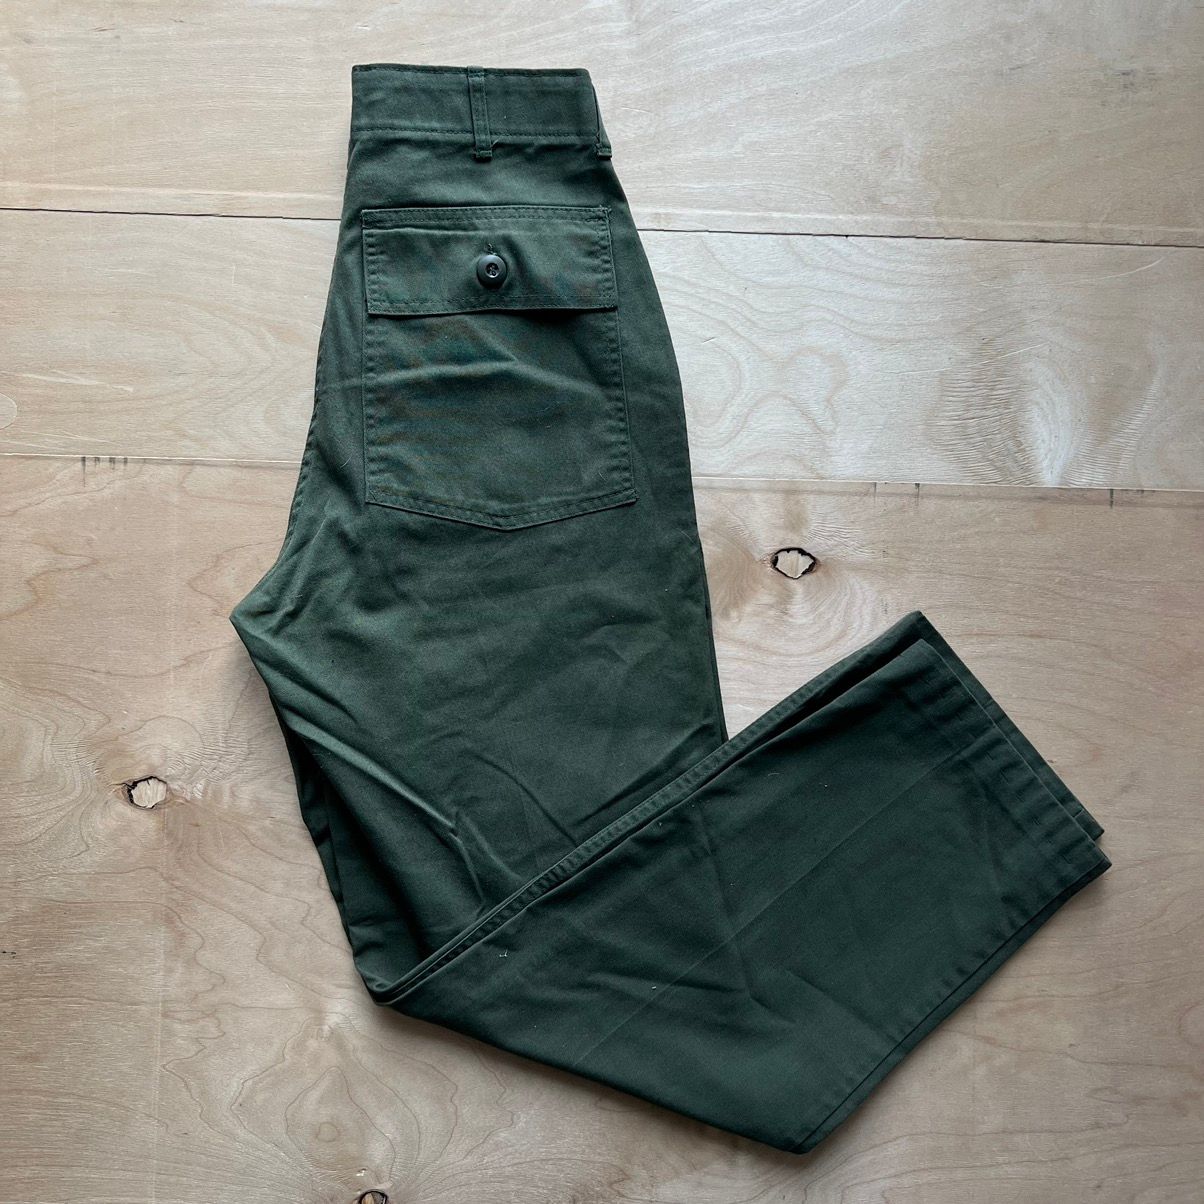 Vintage Vintage Military OG 507 Pants 26x28.5 Green Army Workwear Size US 26 / EU 42 - 1 Preview